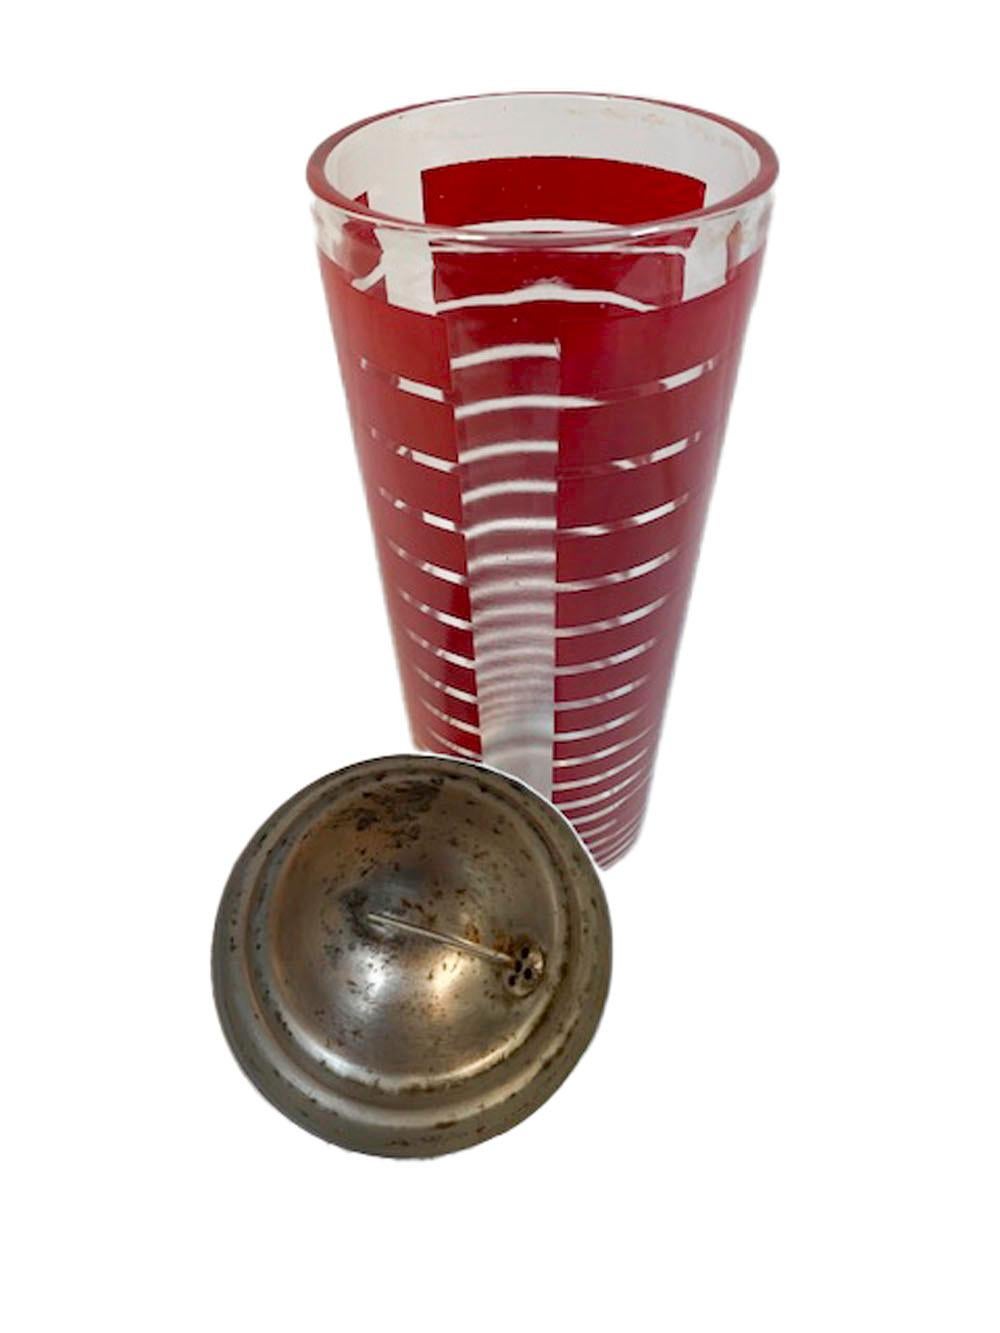 Mid-Century Modern clear glass cocktail shaker with three panels of graduated red enamel bars and having a domed chrome lid.